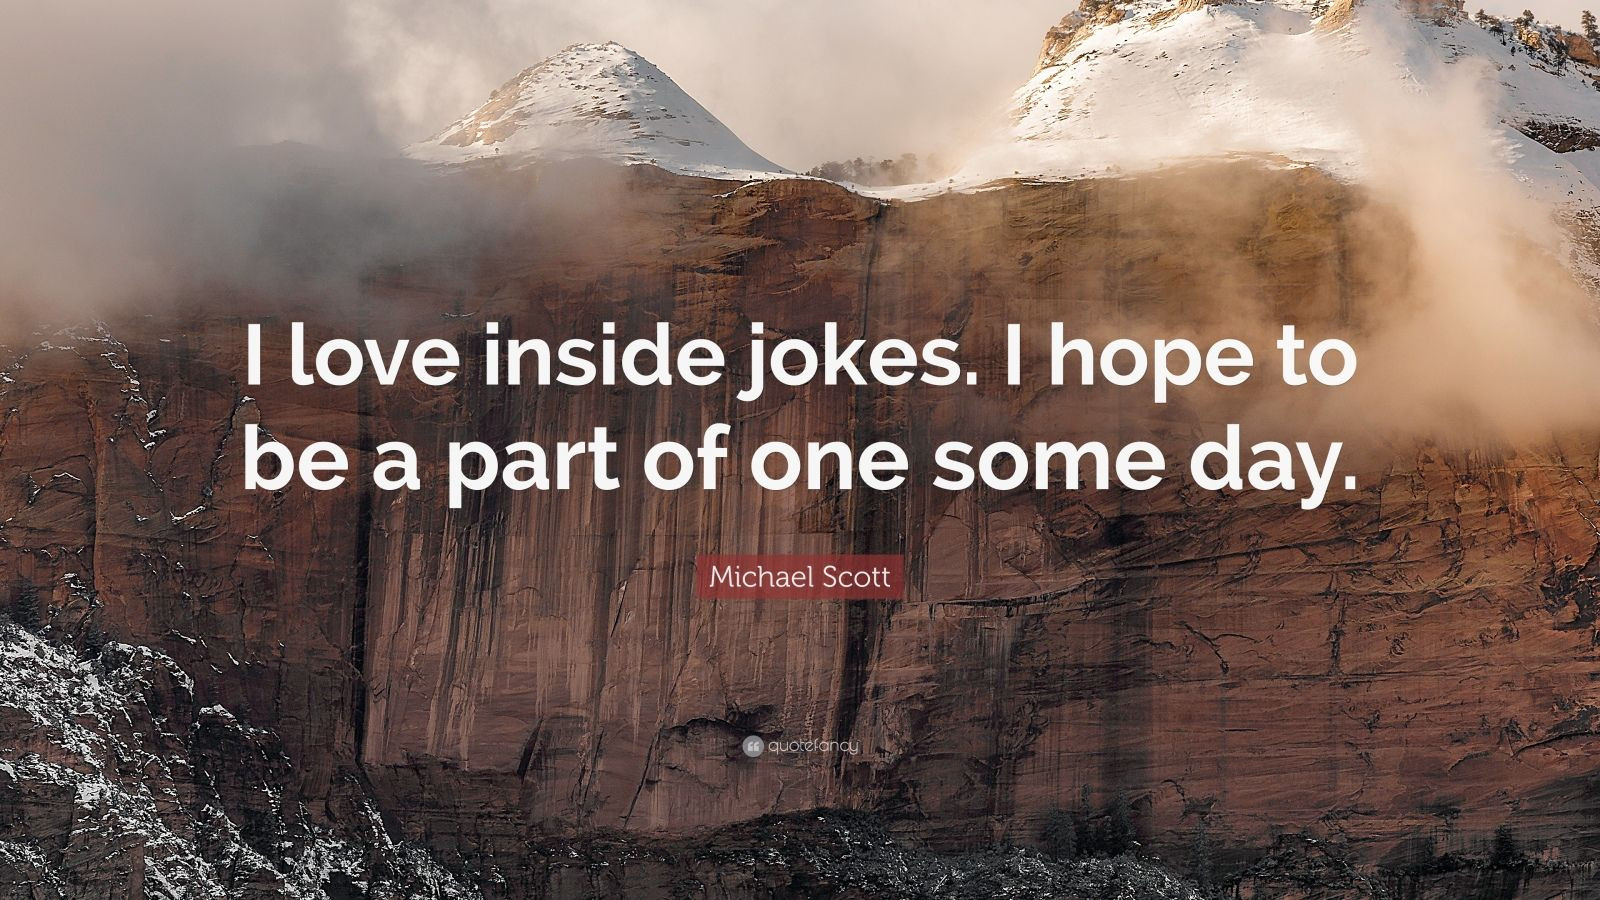 Michael Scott Quotes About Love
 Michael Scott Quote “I love inside jokes I hope to be a